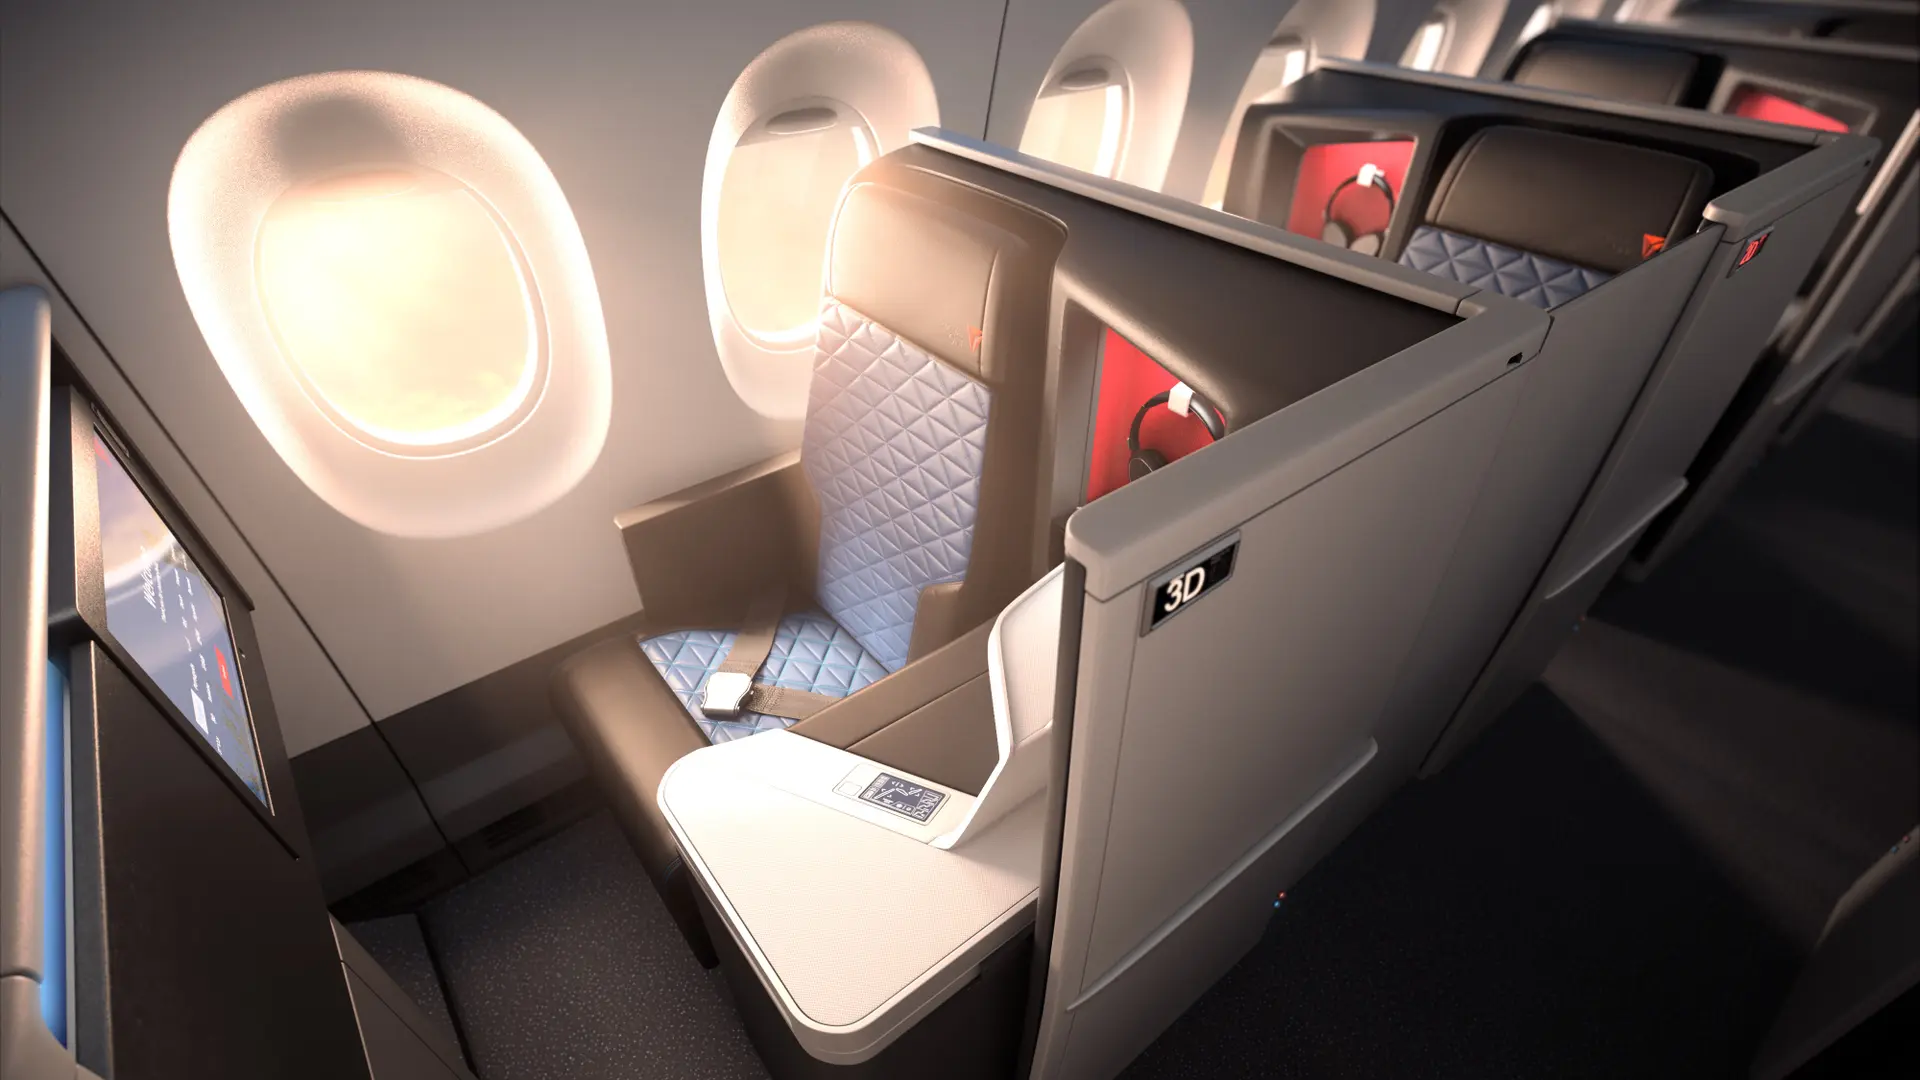 Airlines Toplists - The Best Business Class Suites